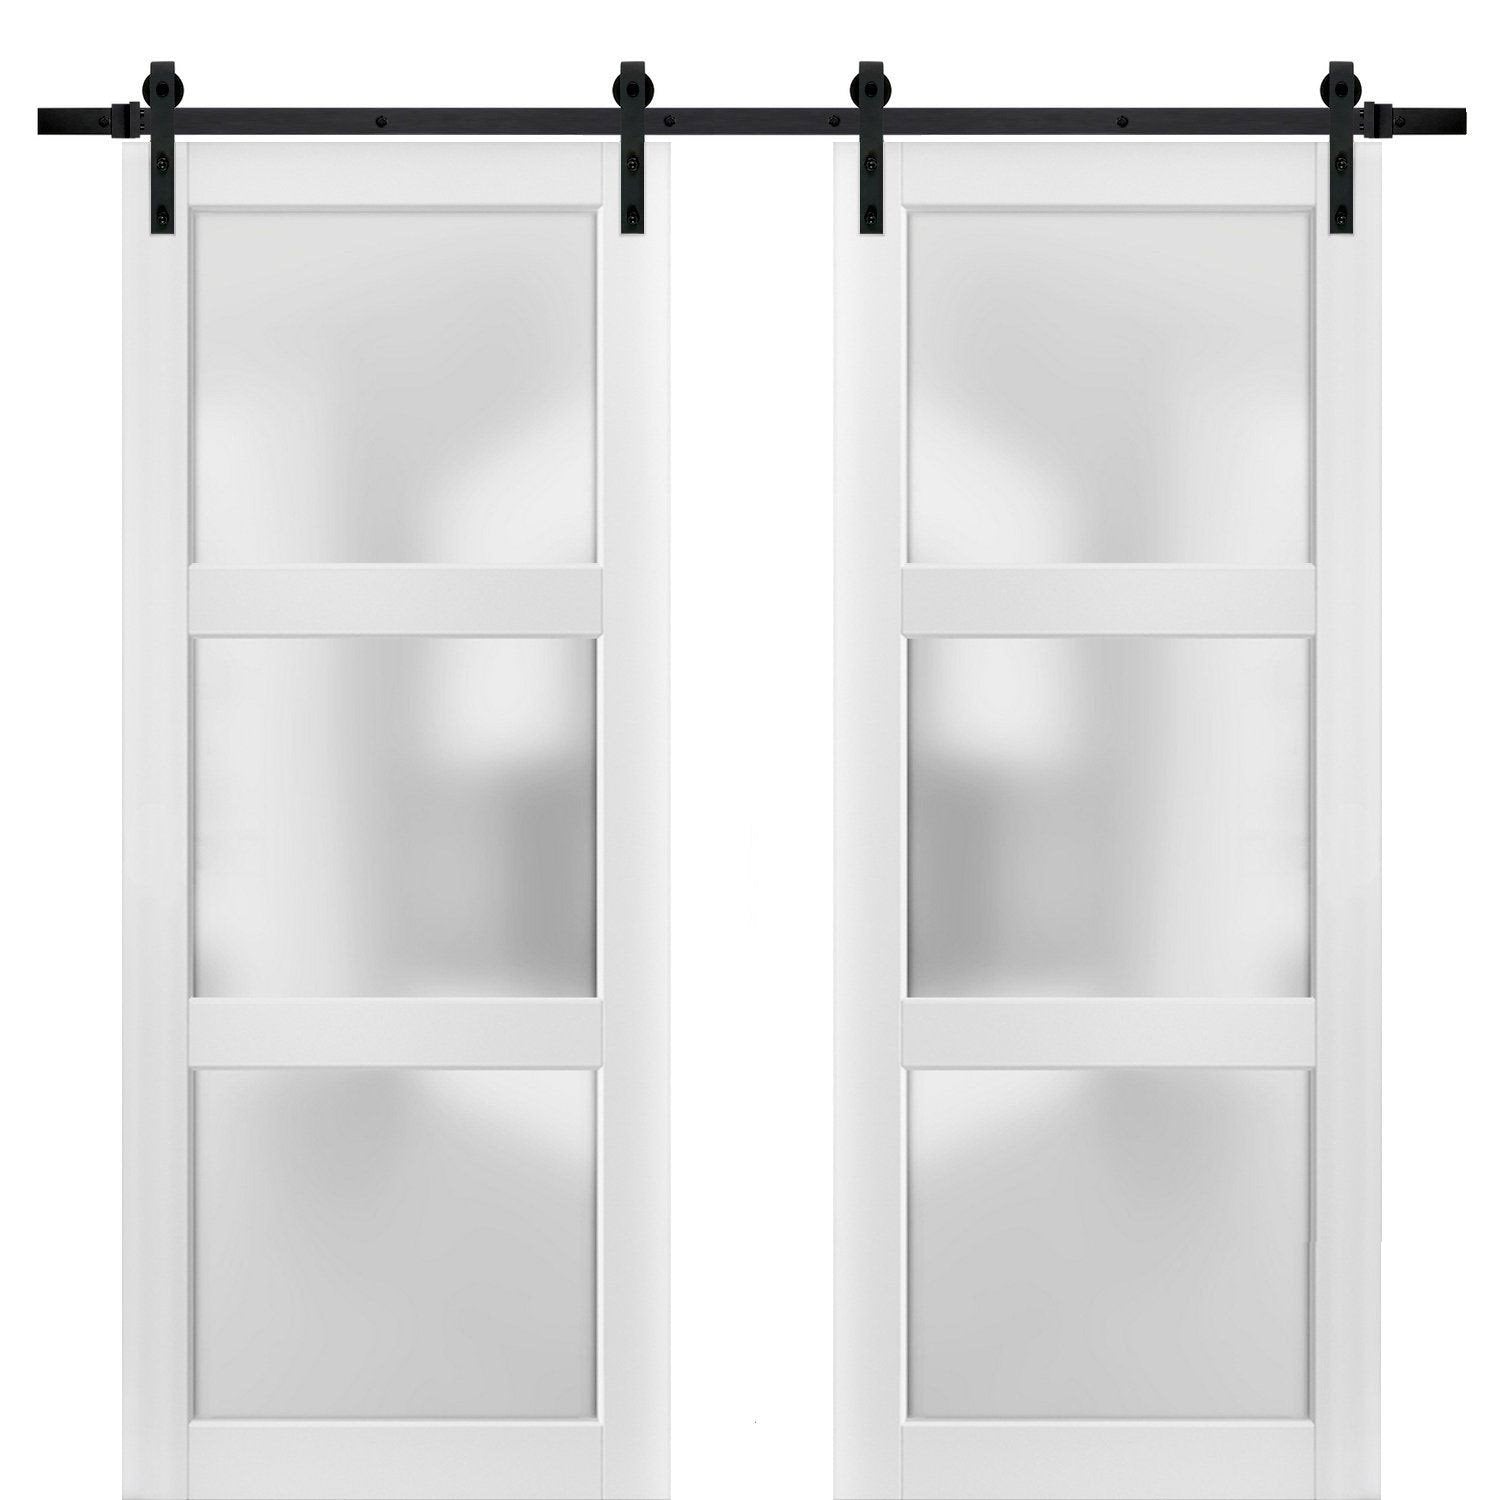 Lucia 2552 White Silk Double Barn Door with Frosted Glass | Black Rail